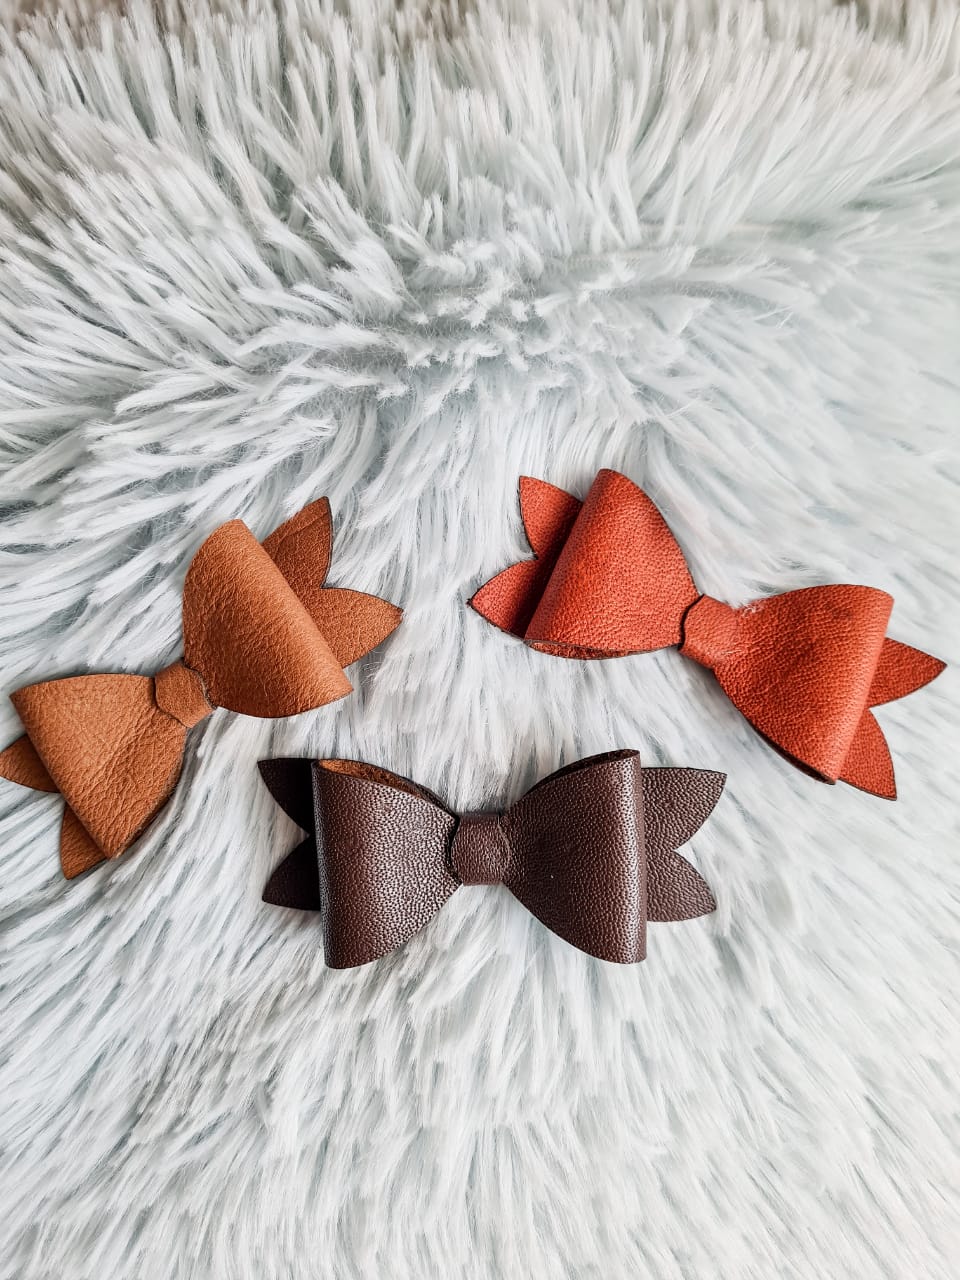 Genuine Leather Handmade Bow or Headband (2 pack) Was R140 now R105)